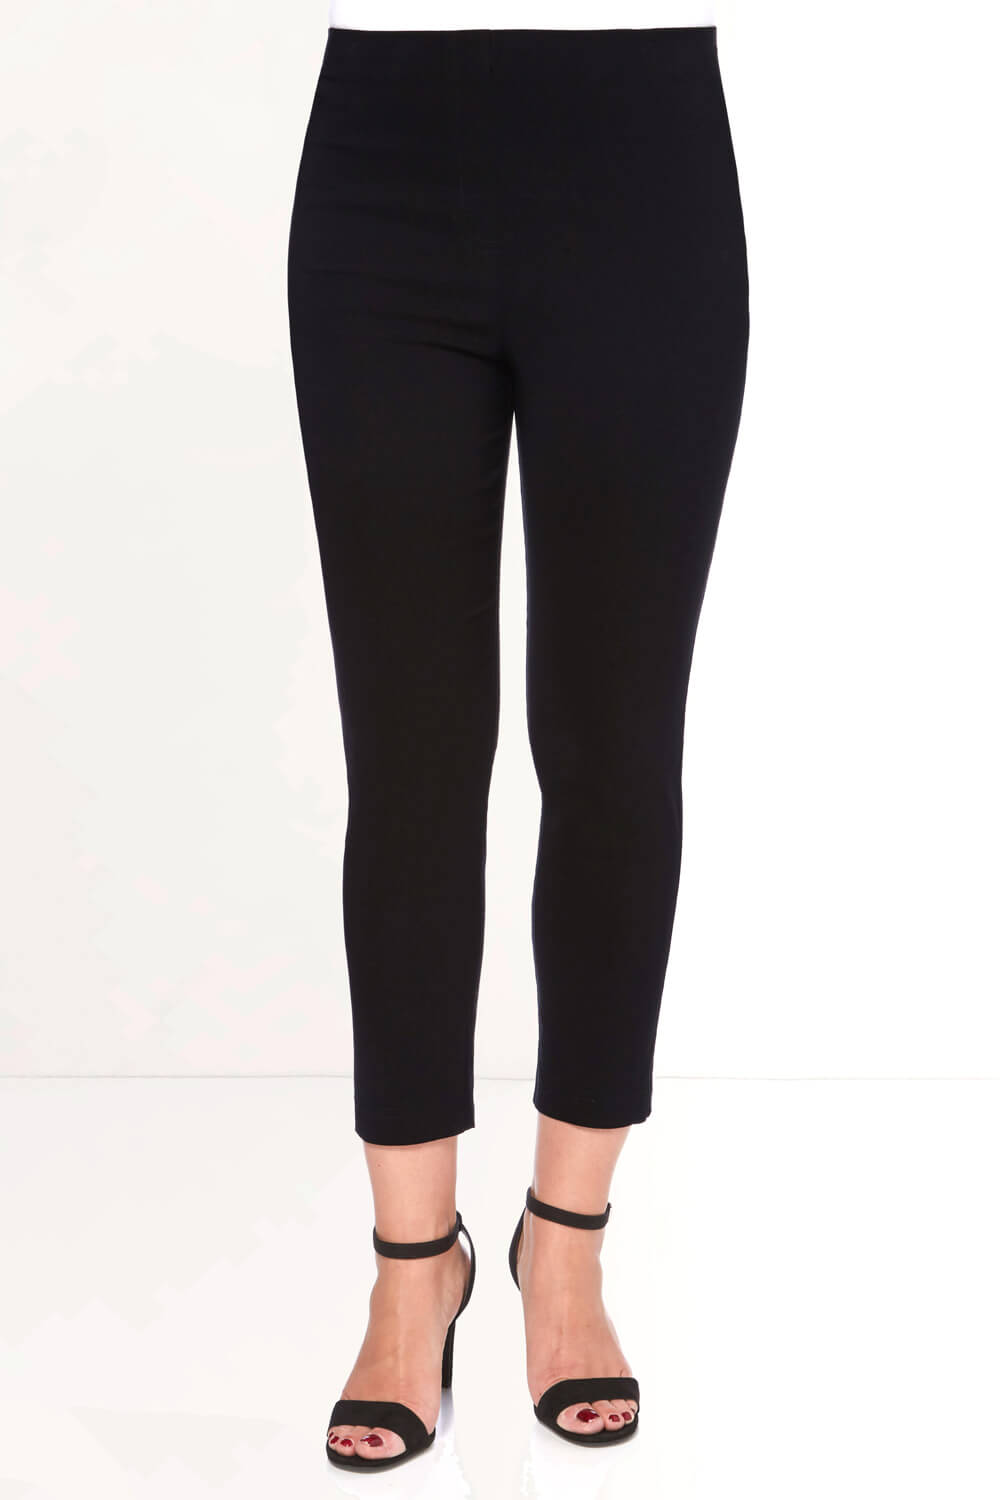 Black 3/4 Length Stretch Trouser, Image 1 of 4